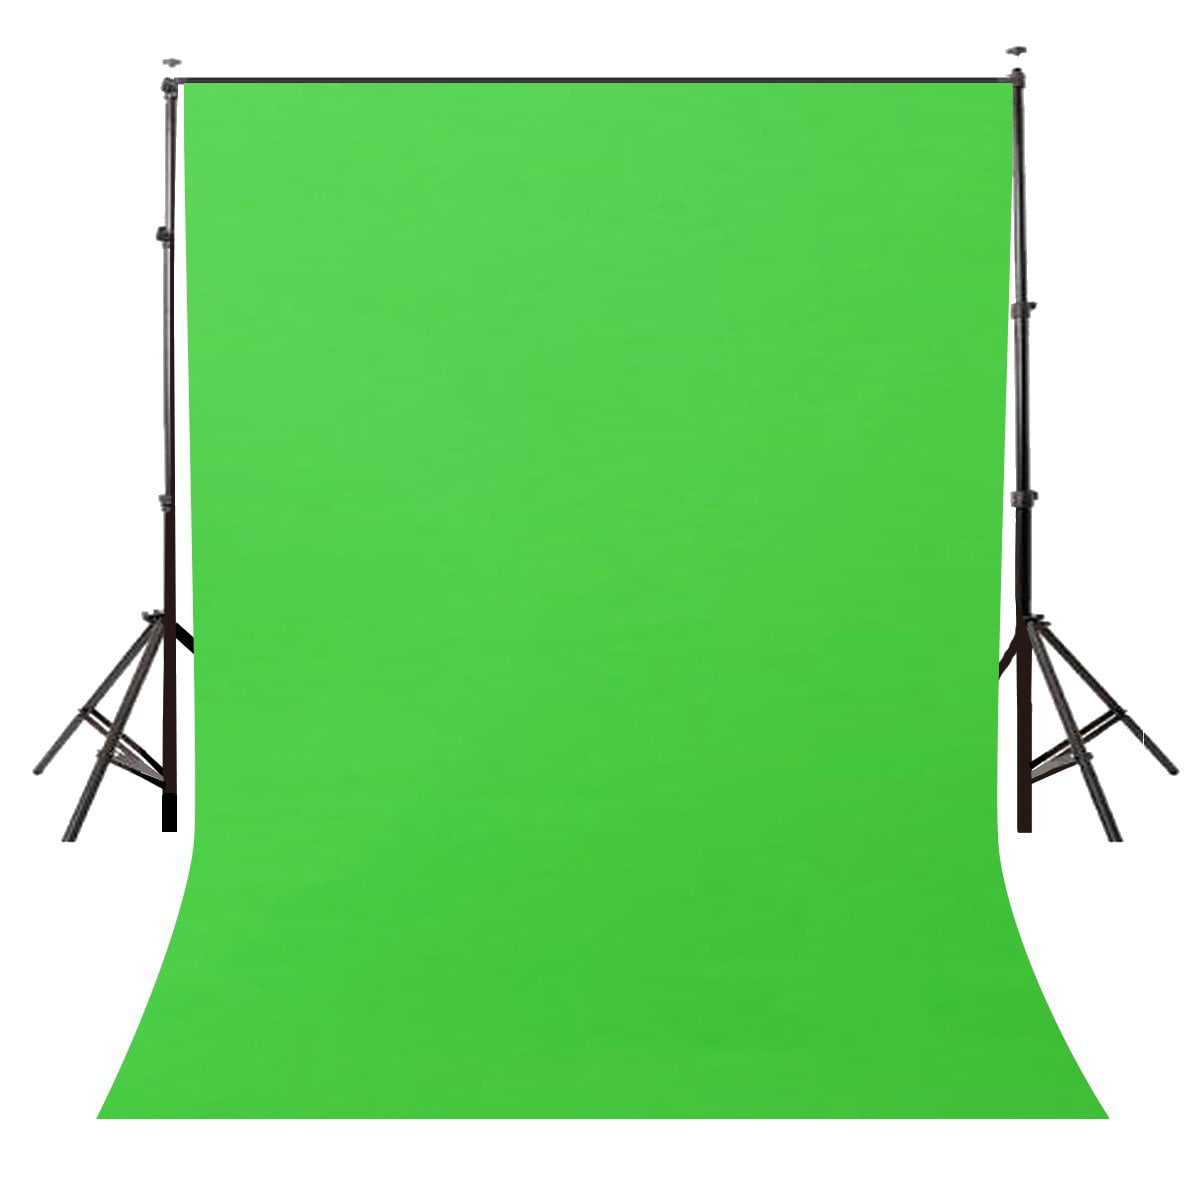 solid green green screen background images